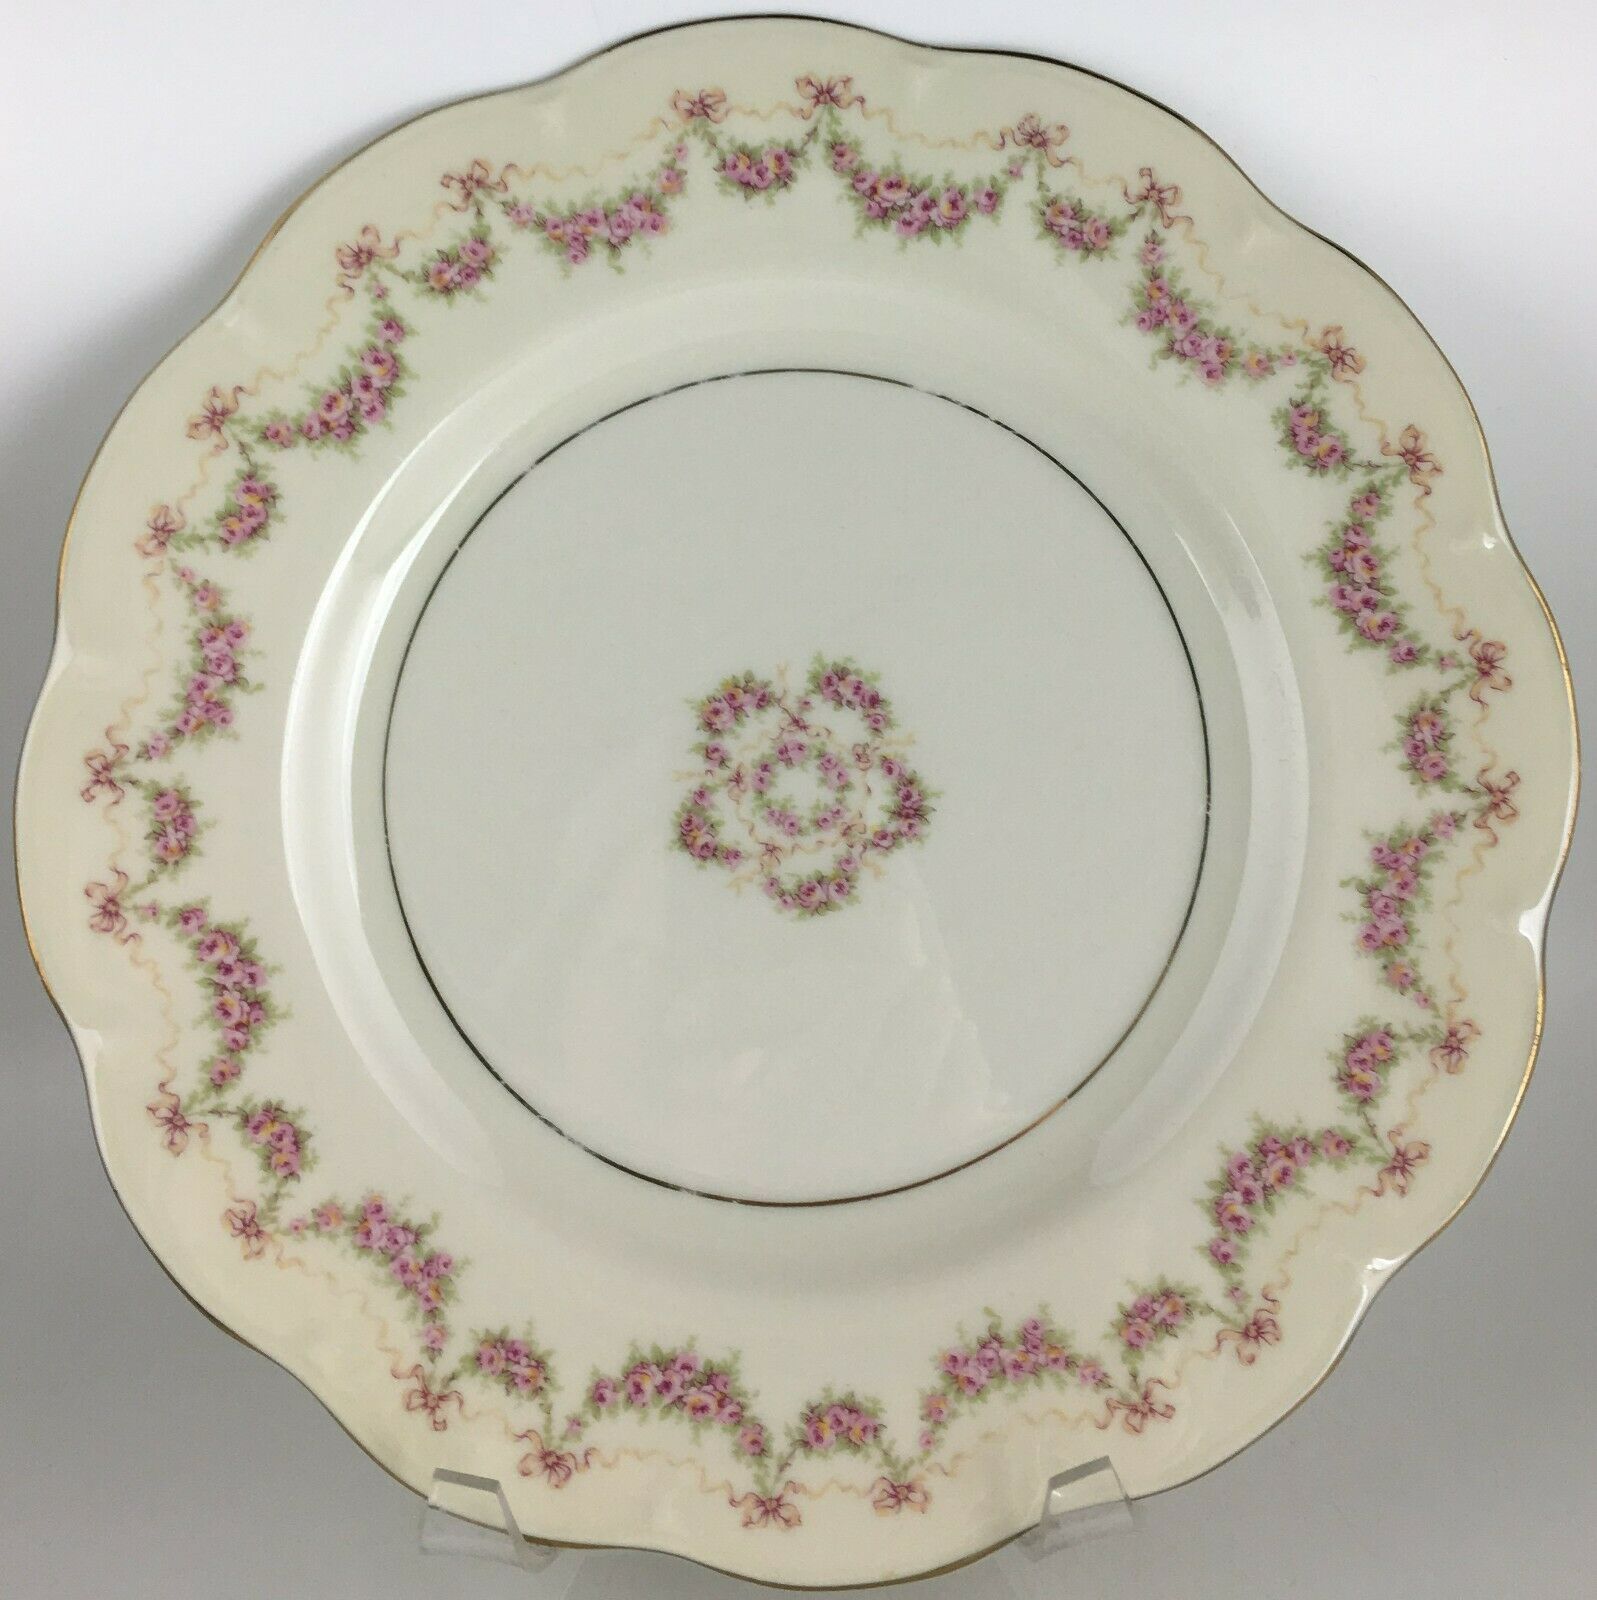 Primary image for Theodore Haviland New York Hamilton Dinner plate 2nd quality